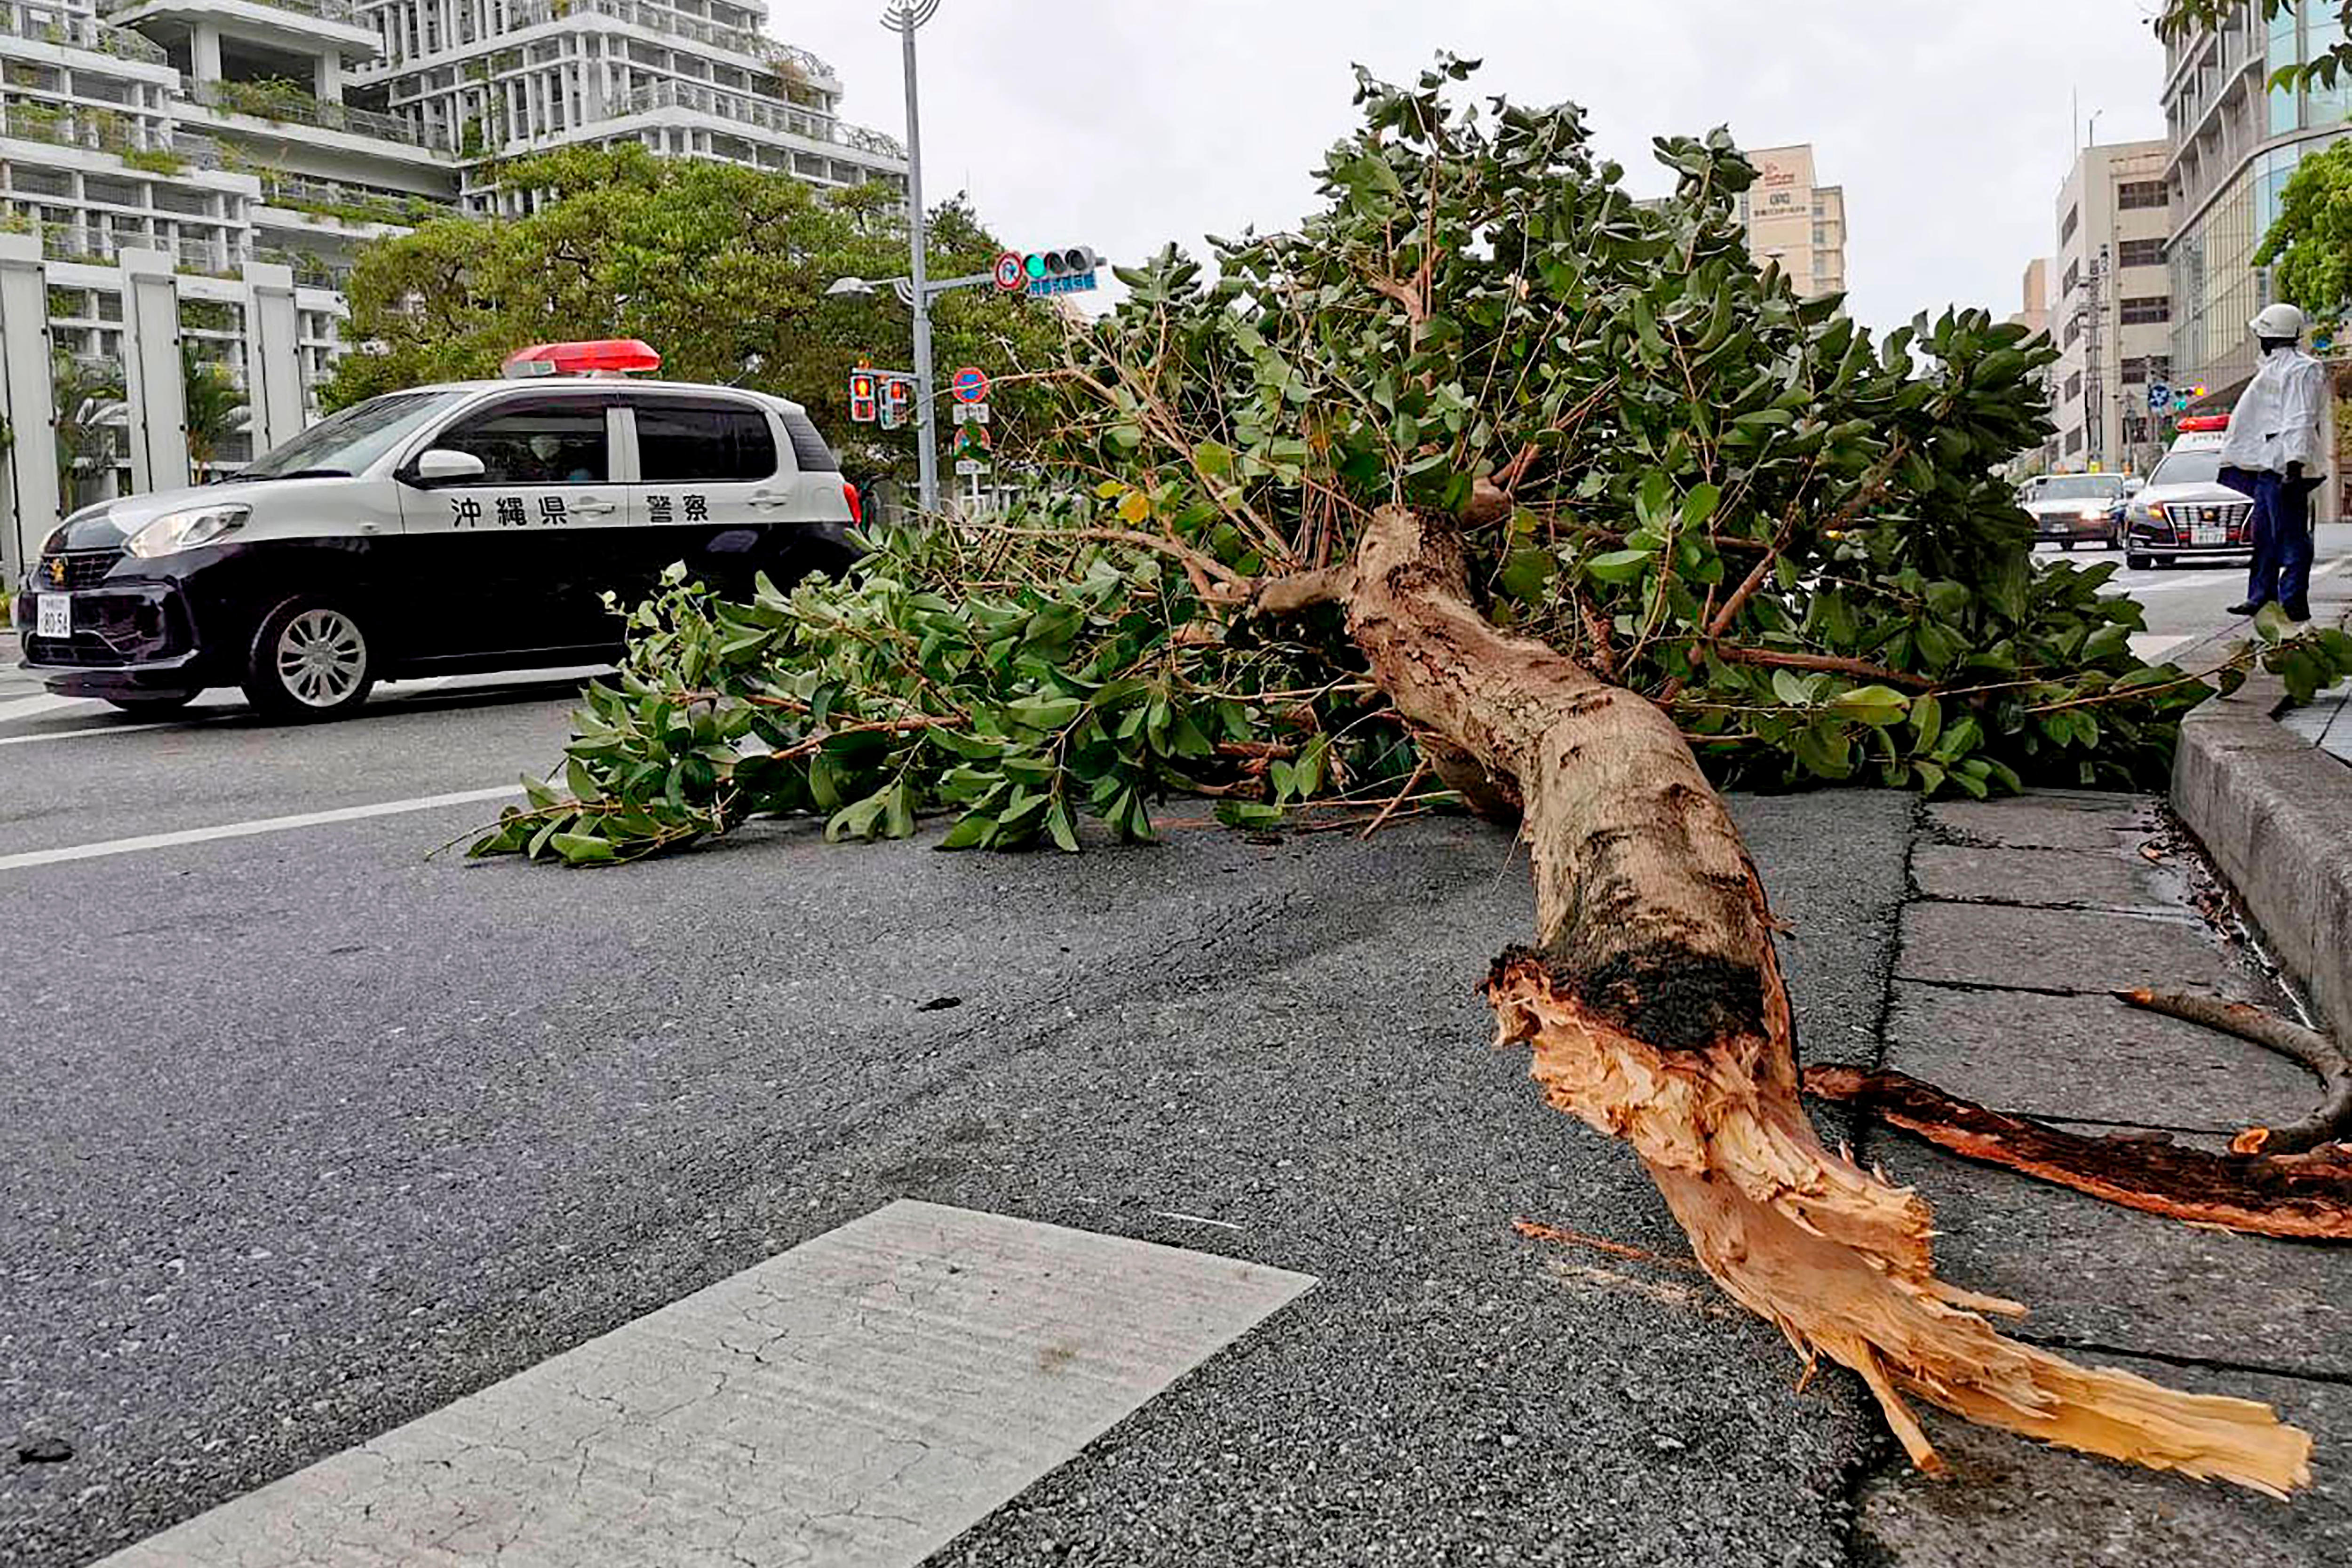 A tree snapped off at the trunk lies across a street as a Japanese police car drives past. 